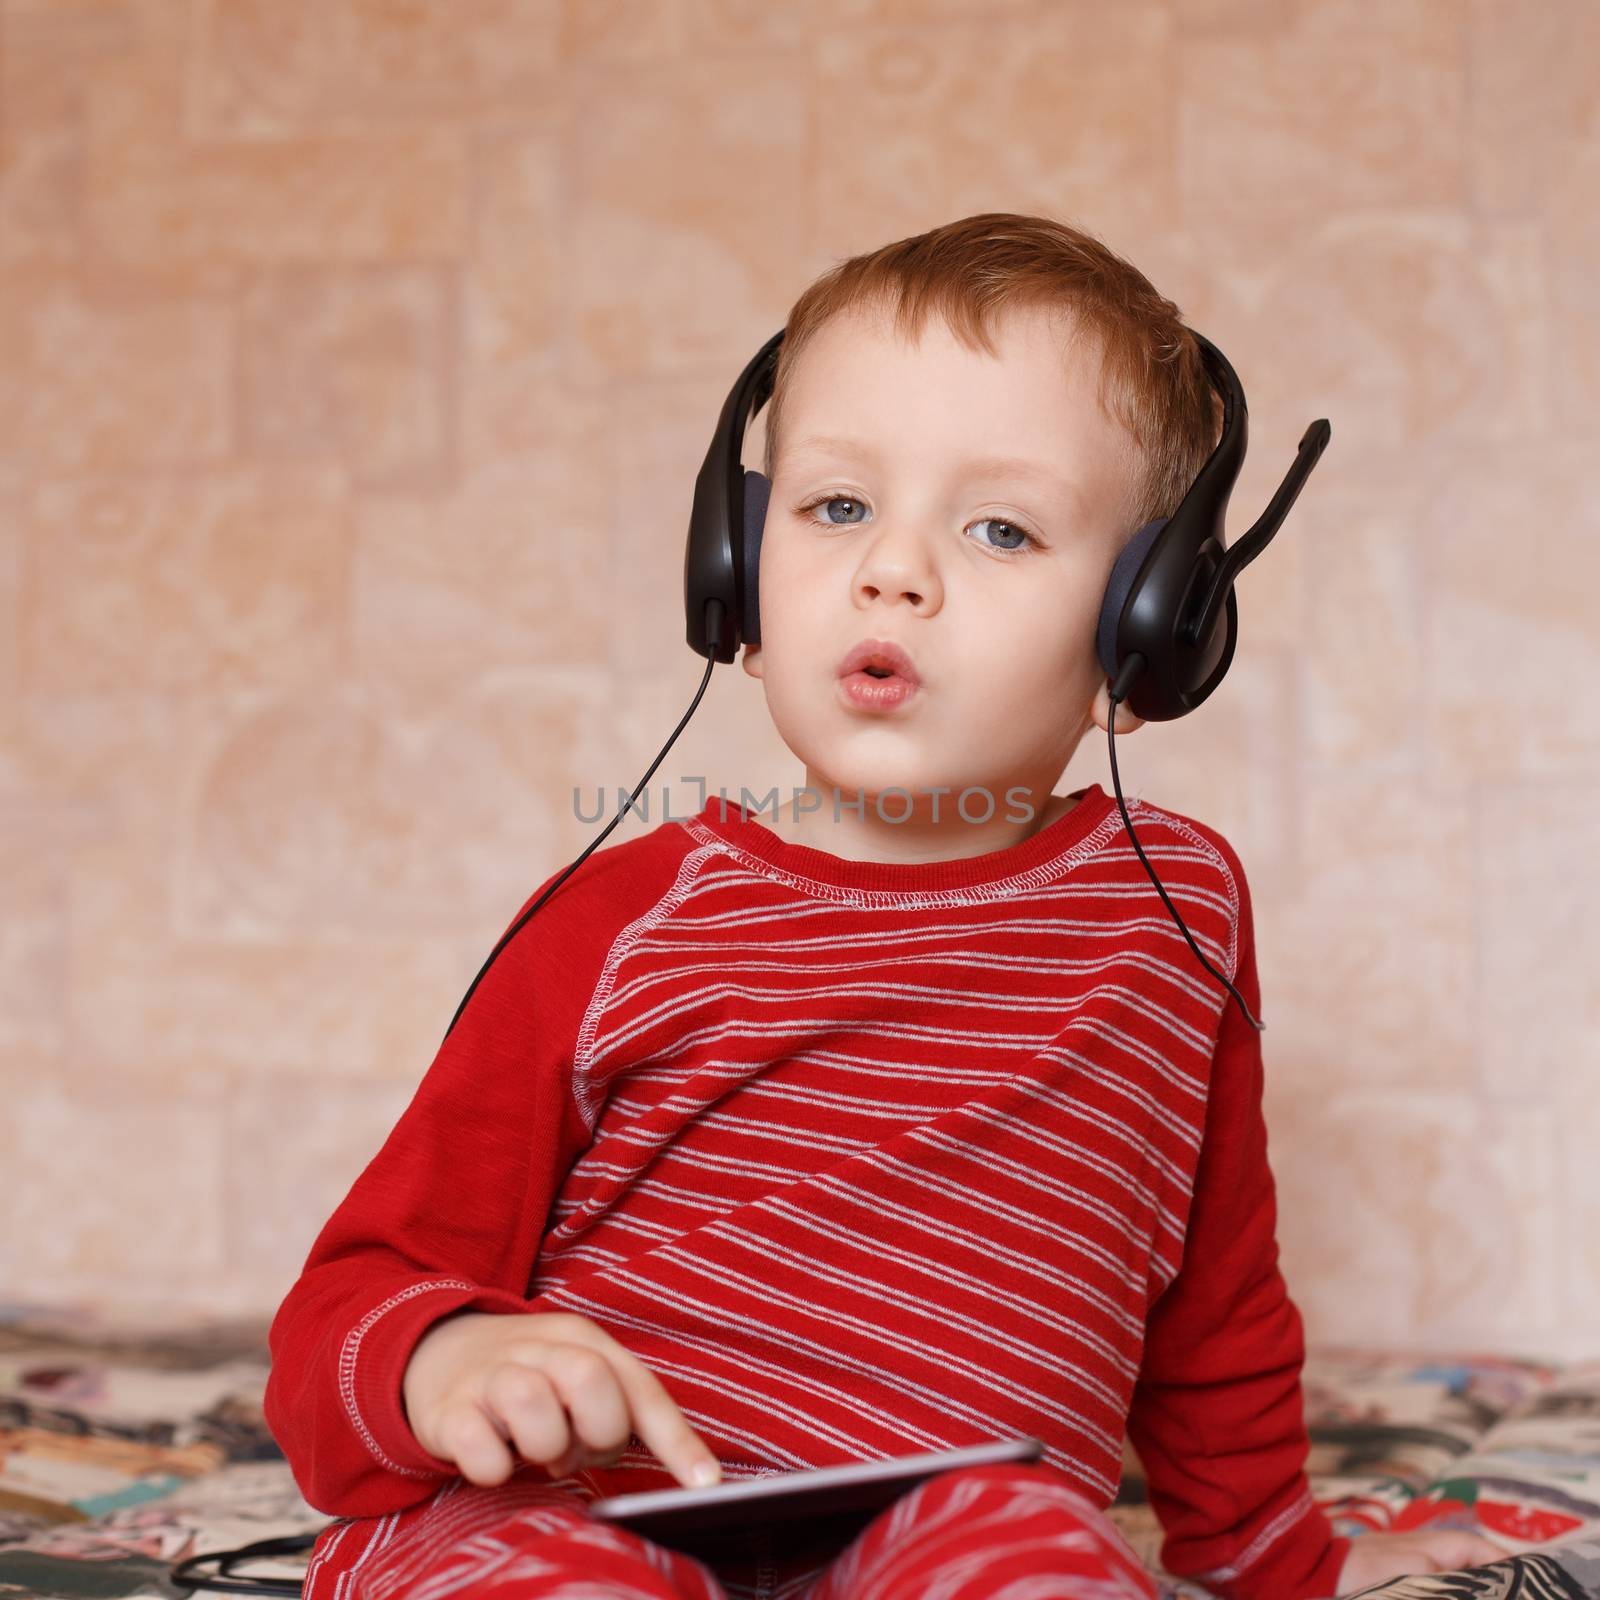 Little boy with headphones listening to music and singing